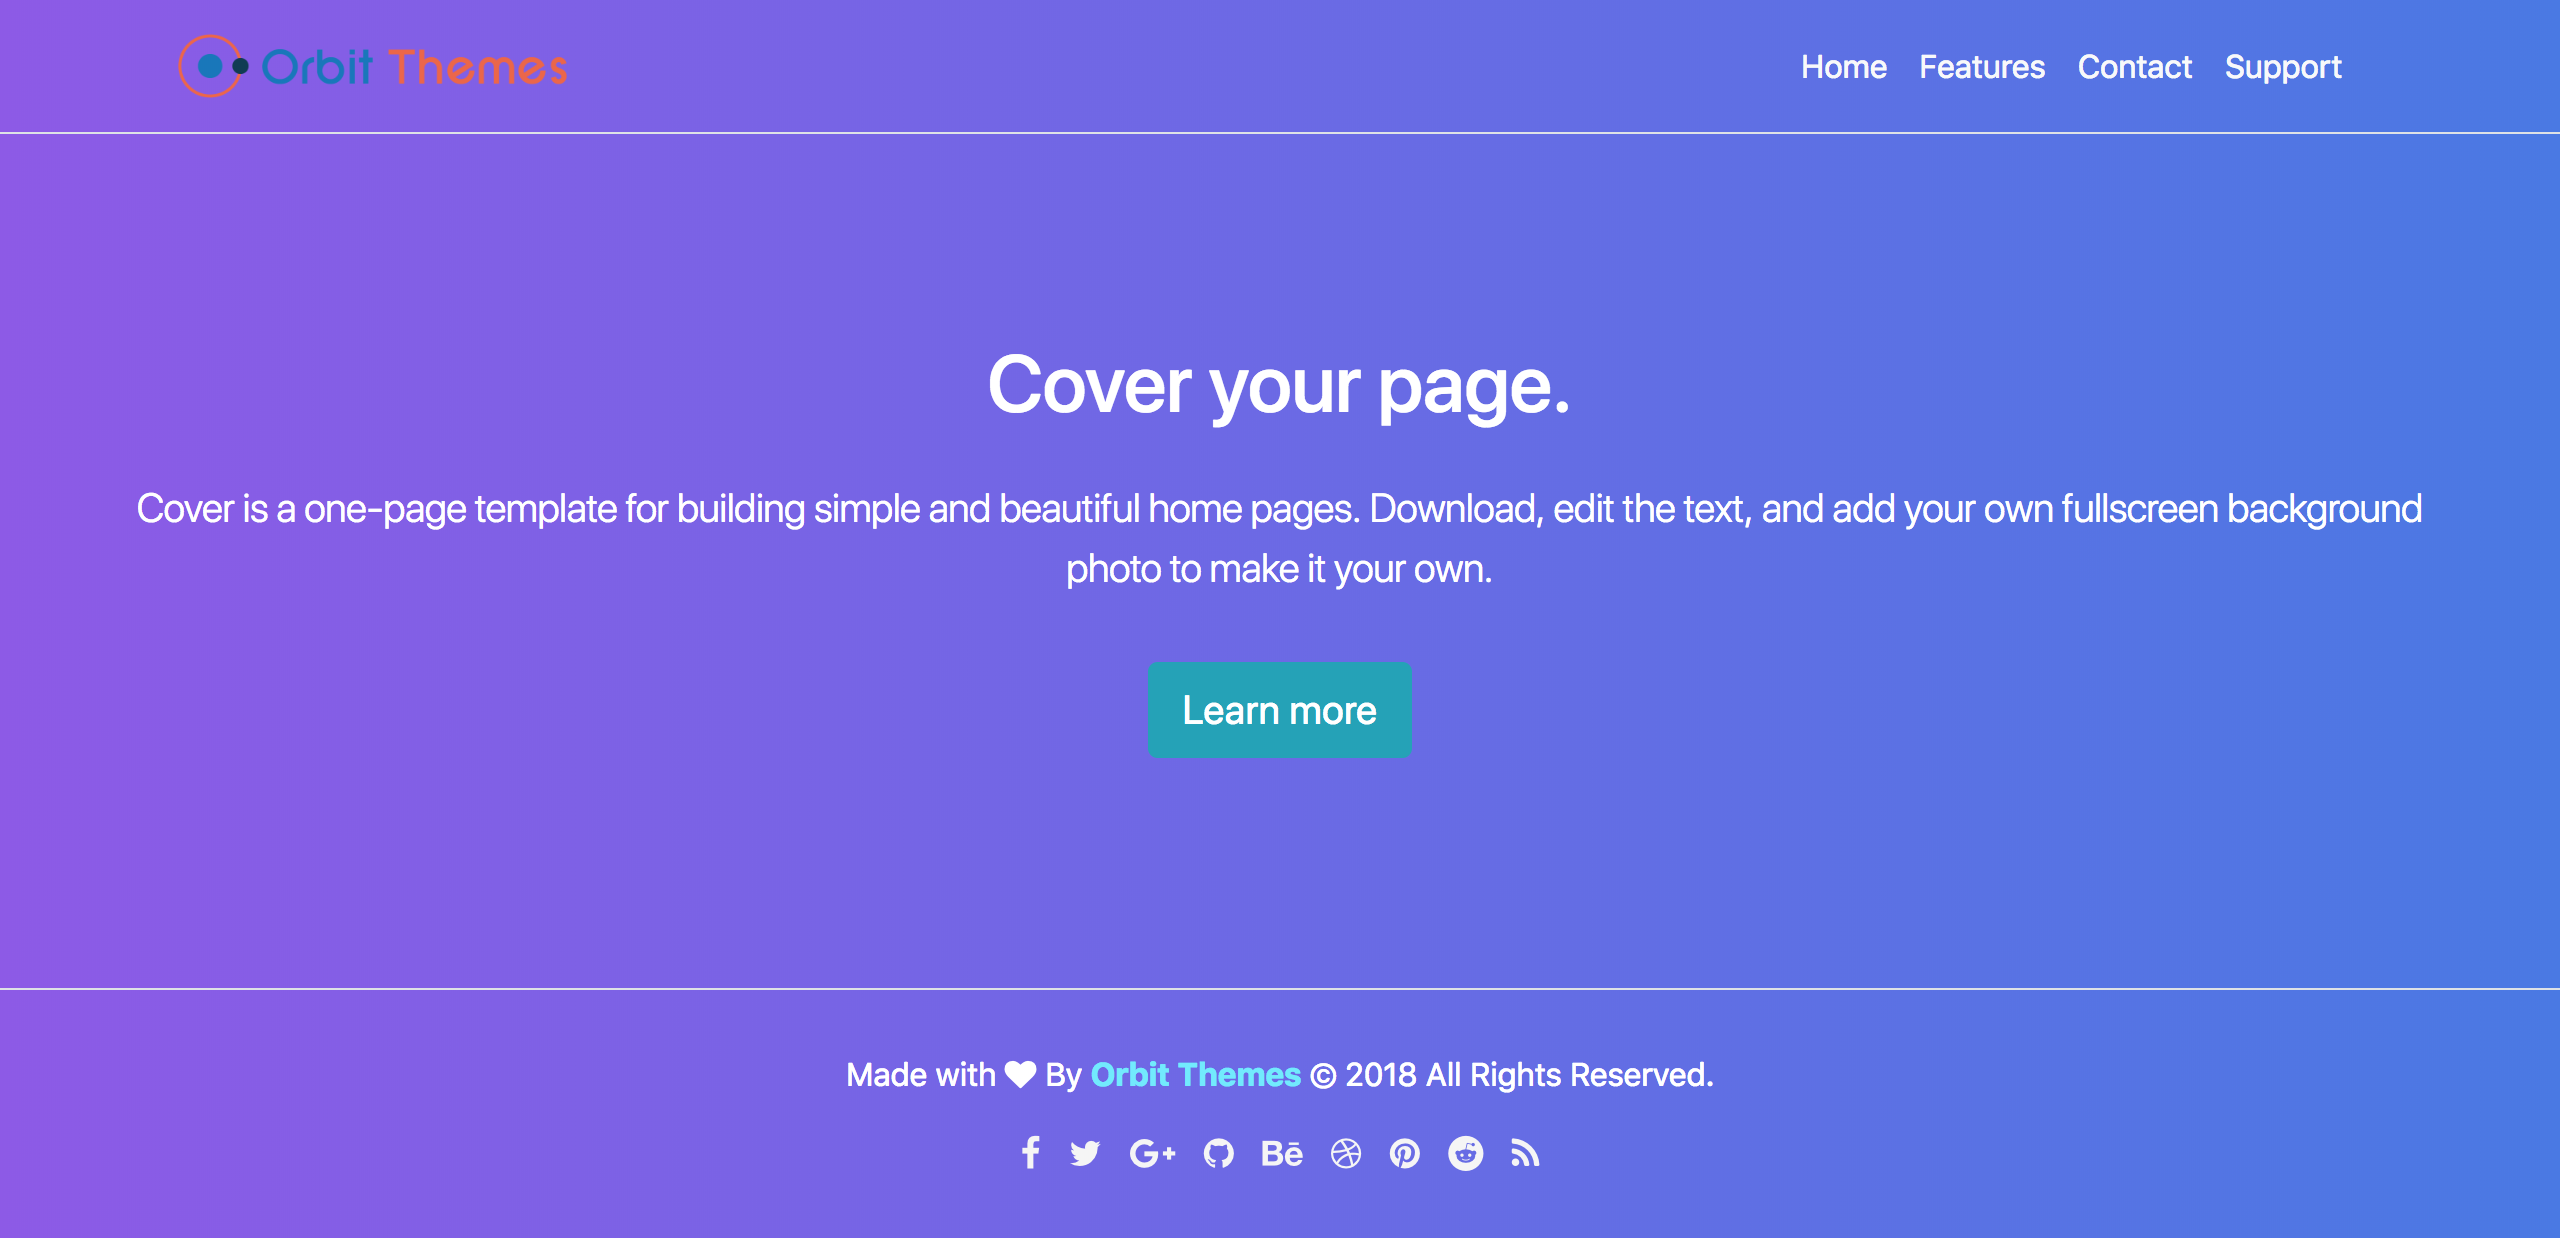 GitHub - orbitthemes/cover-plus: Cover Plus Is The Beautiful One Page ...